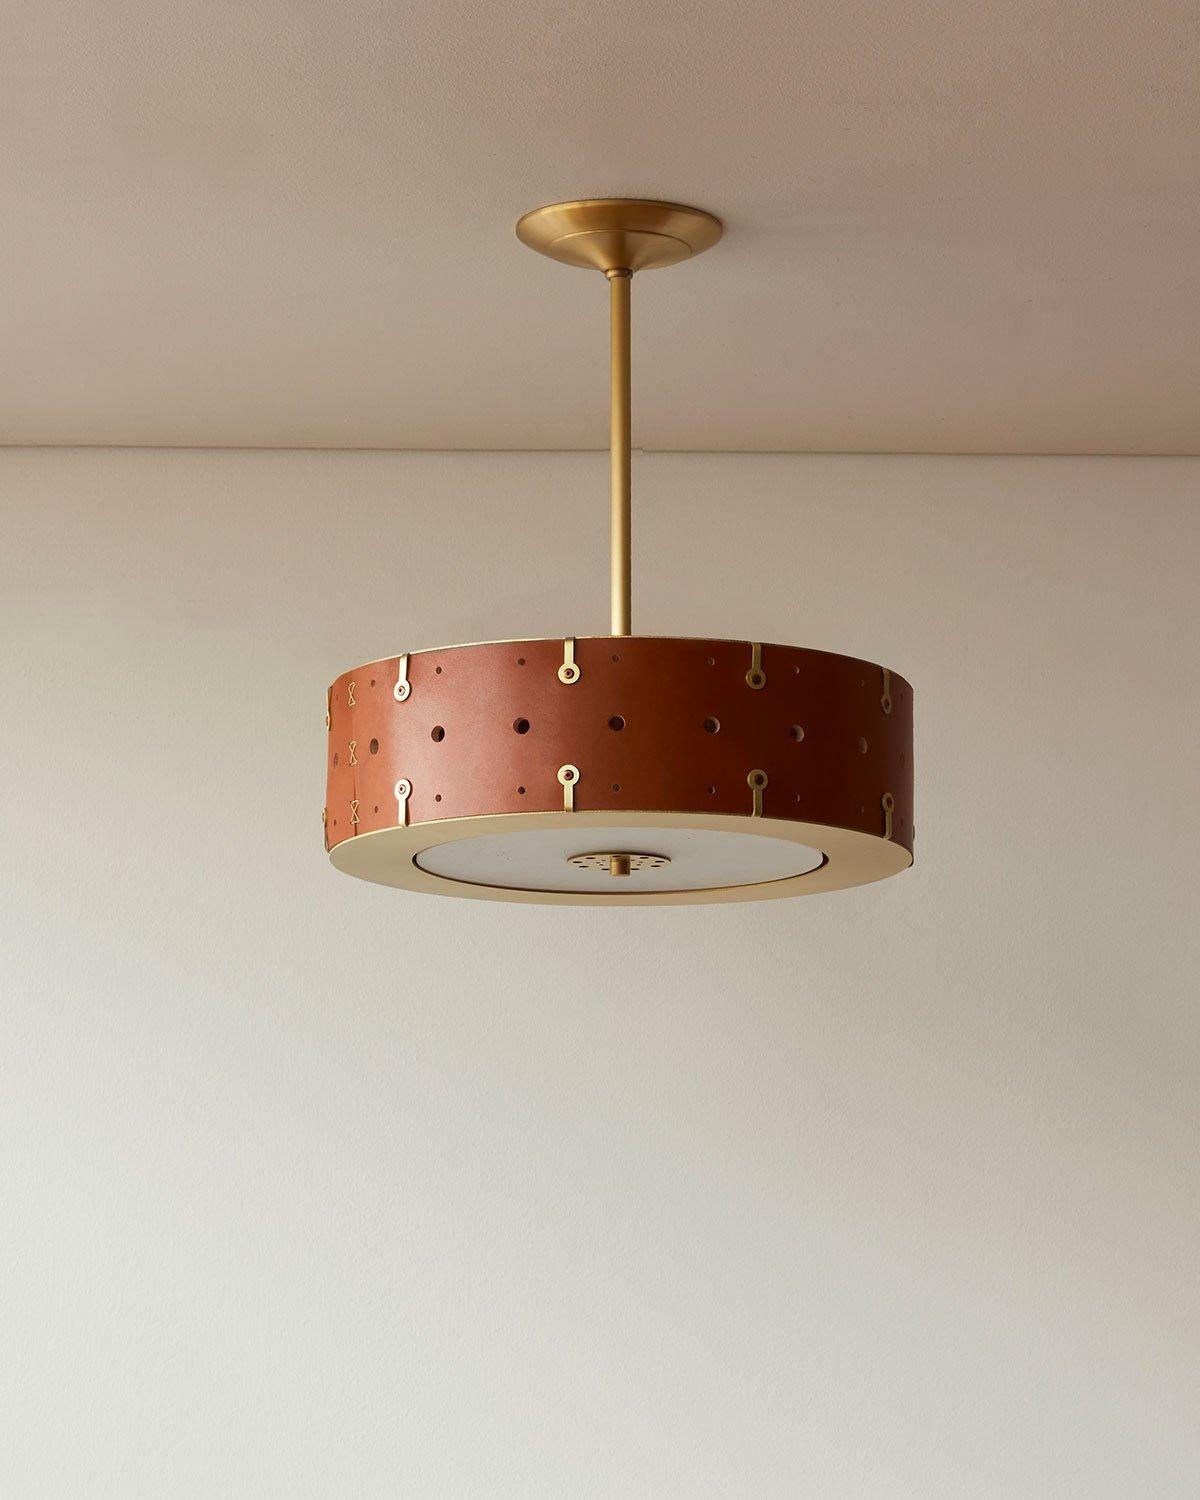 Composed of a hand-sewn leather drum fitted between a satin brass top and bottom ring, the Sarah can be customized with the drop height that is right for your space and the pipe can be removed altogether to create a flush-mount fixture. A thin white